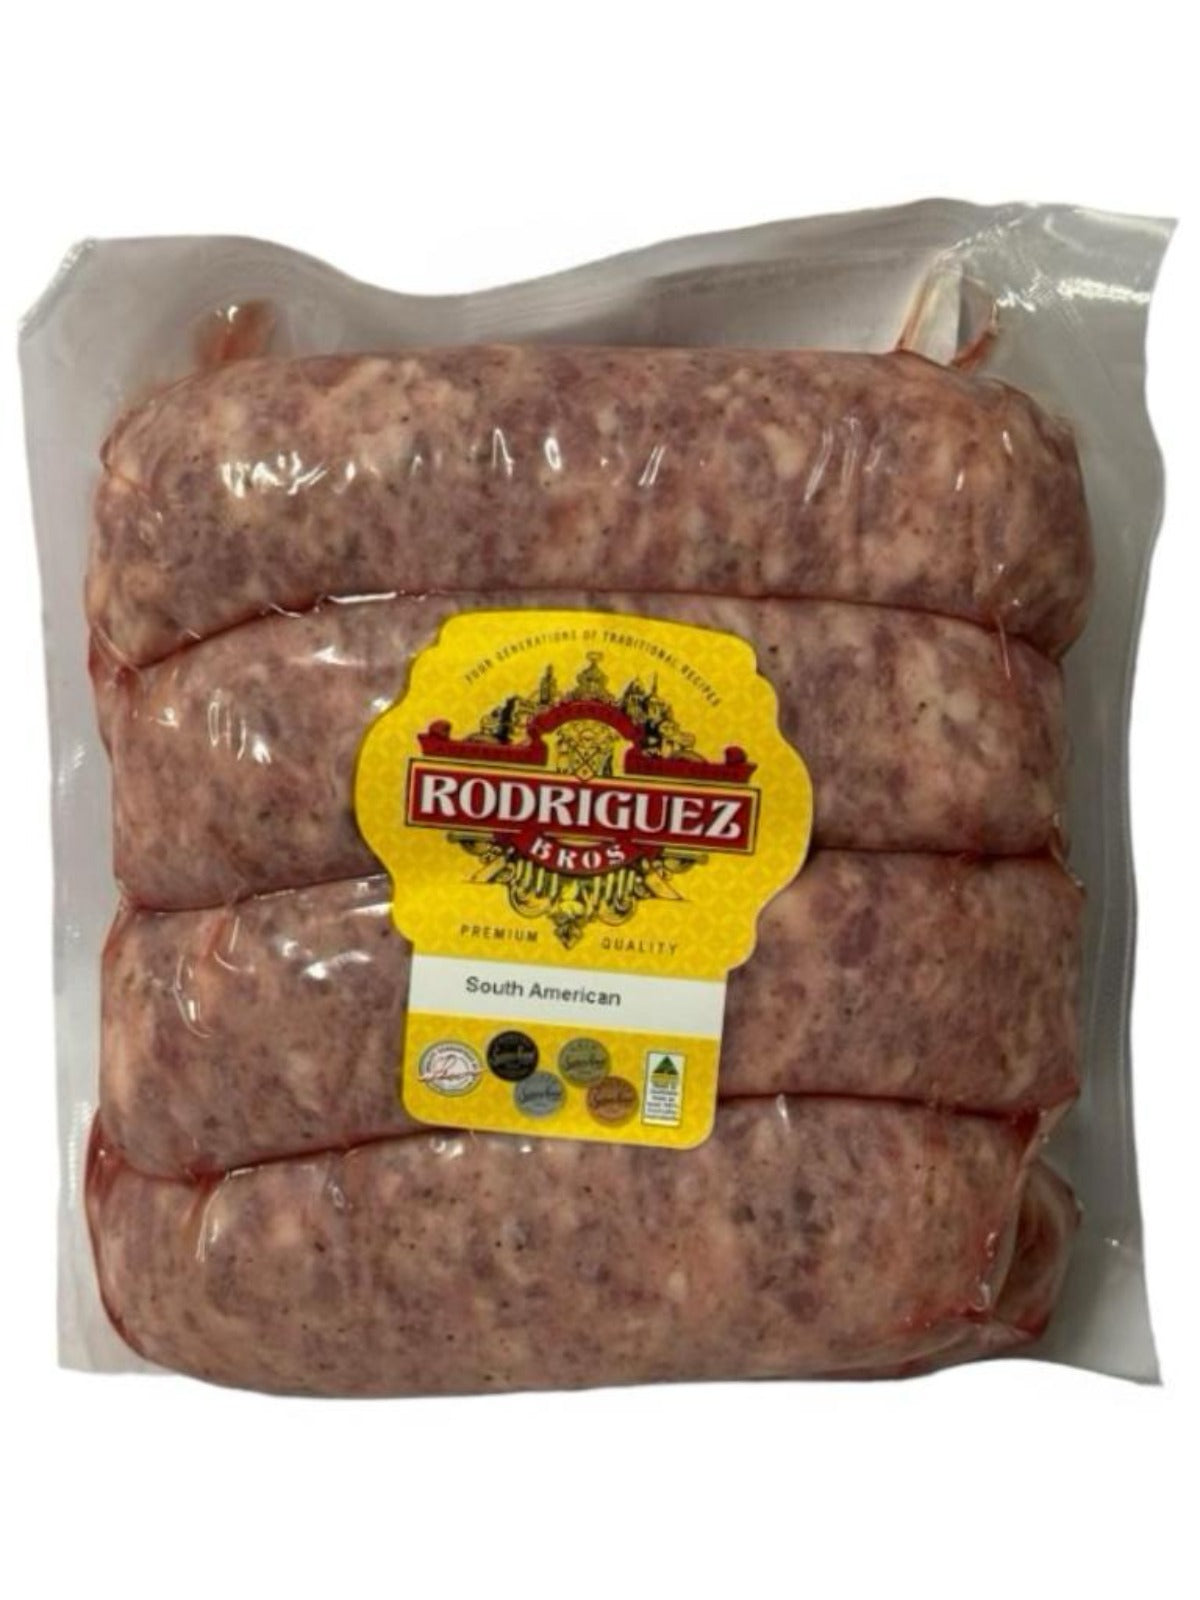 Parrillero South American Chorizo Random weight approx. 1kg packet 8 pieces regular price $16.00 AUD. You are guaranteed to receive at least 950g of product, equivalent price of $16.84 per kg.